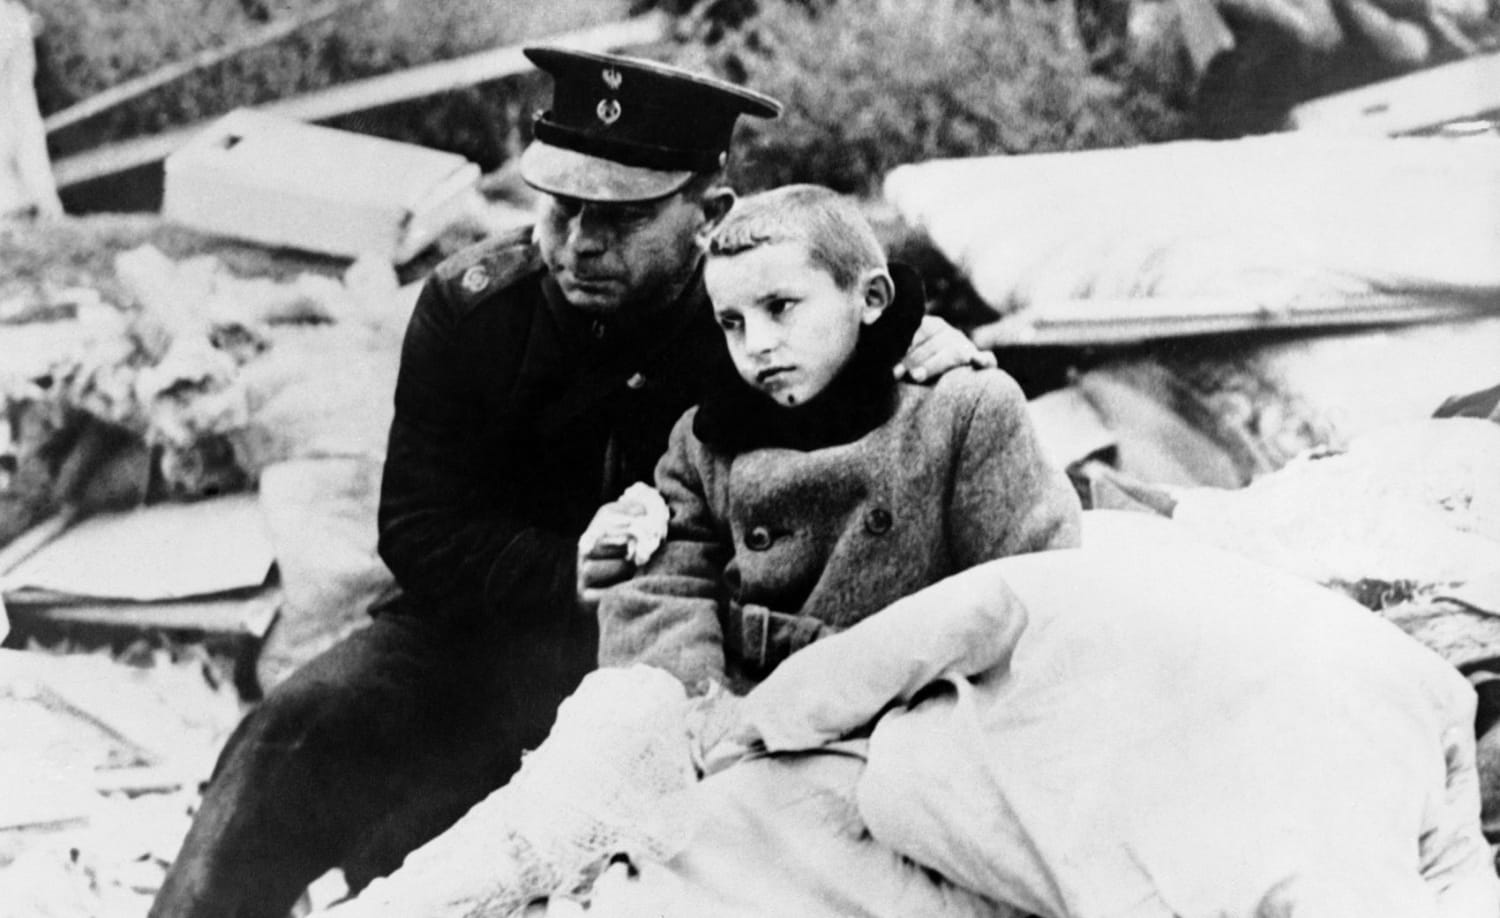 A uniformed Polish official comforts a boy whose mother was killed in an air raid on Warsaw, September 1939. The boy himself was in the wreckage for 12 hours before rescue crews liberated him.